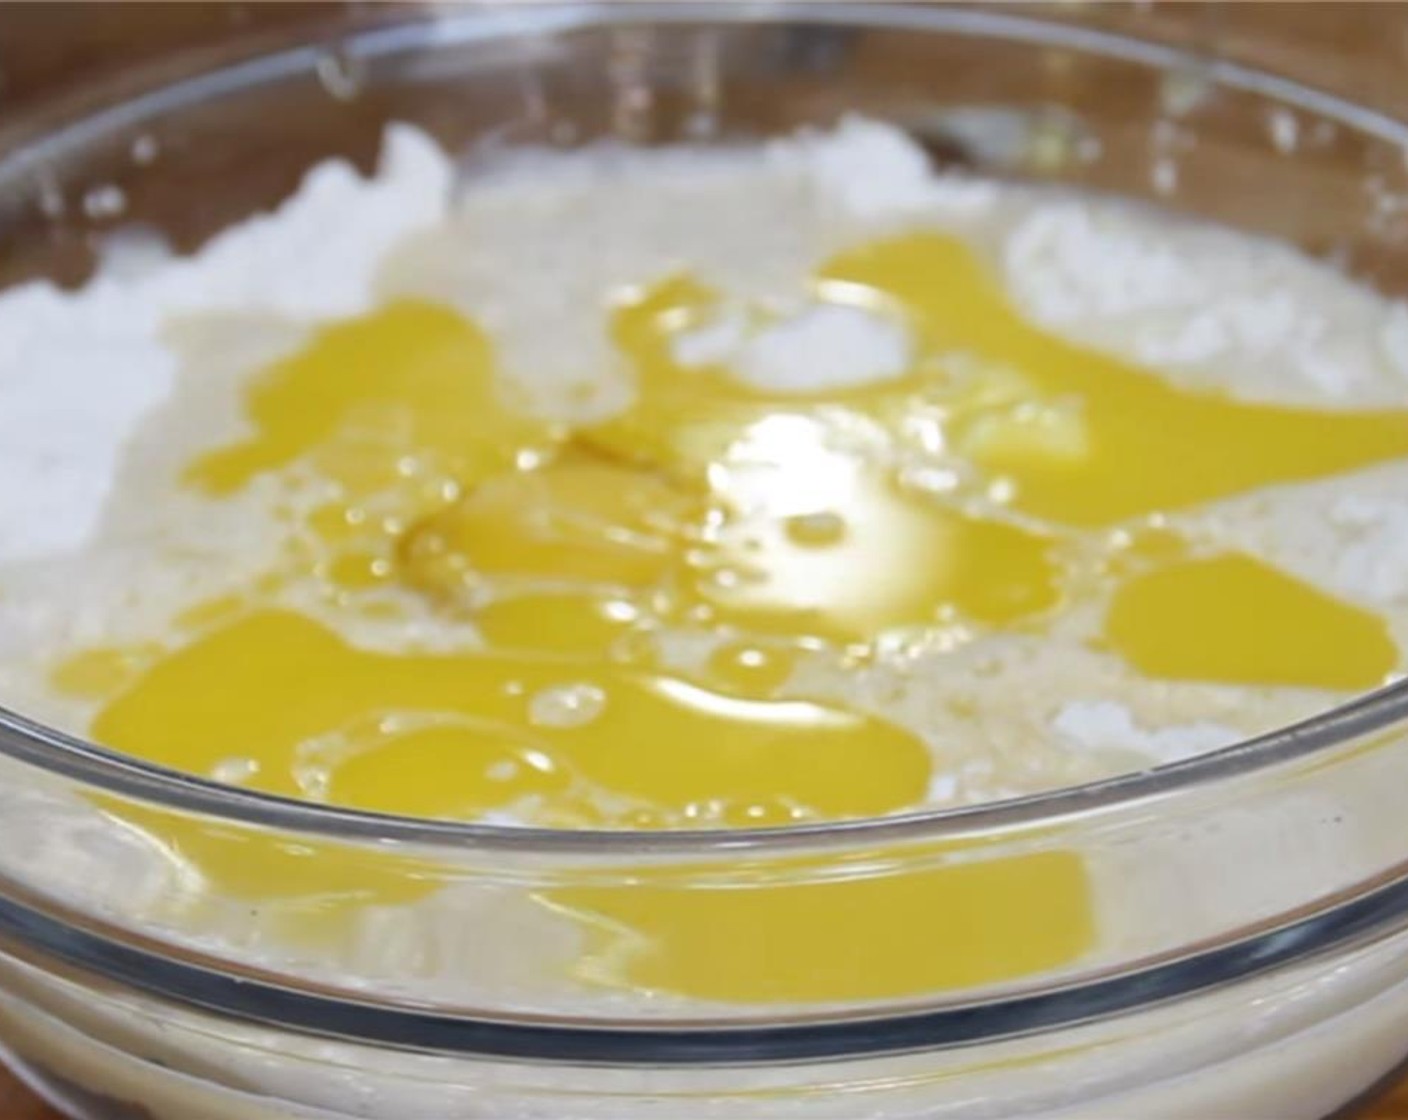 step 6 Add Water (1/2 cup), Evaporated Milk (1/3 cup), Butter (2 Tbsp), and whole Egg (1). Whisk until the mixture becomes smooth and creamy.